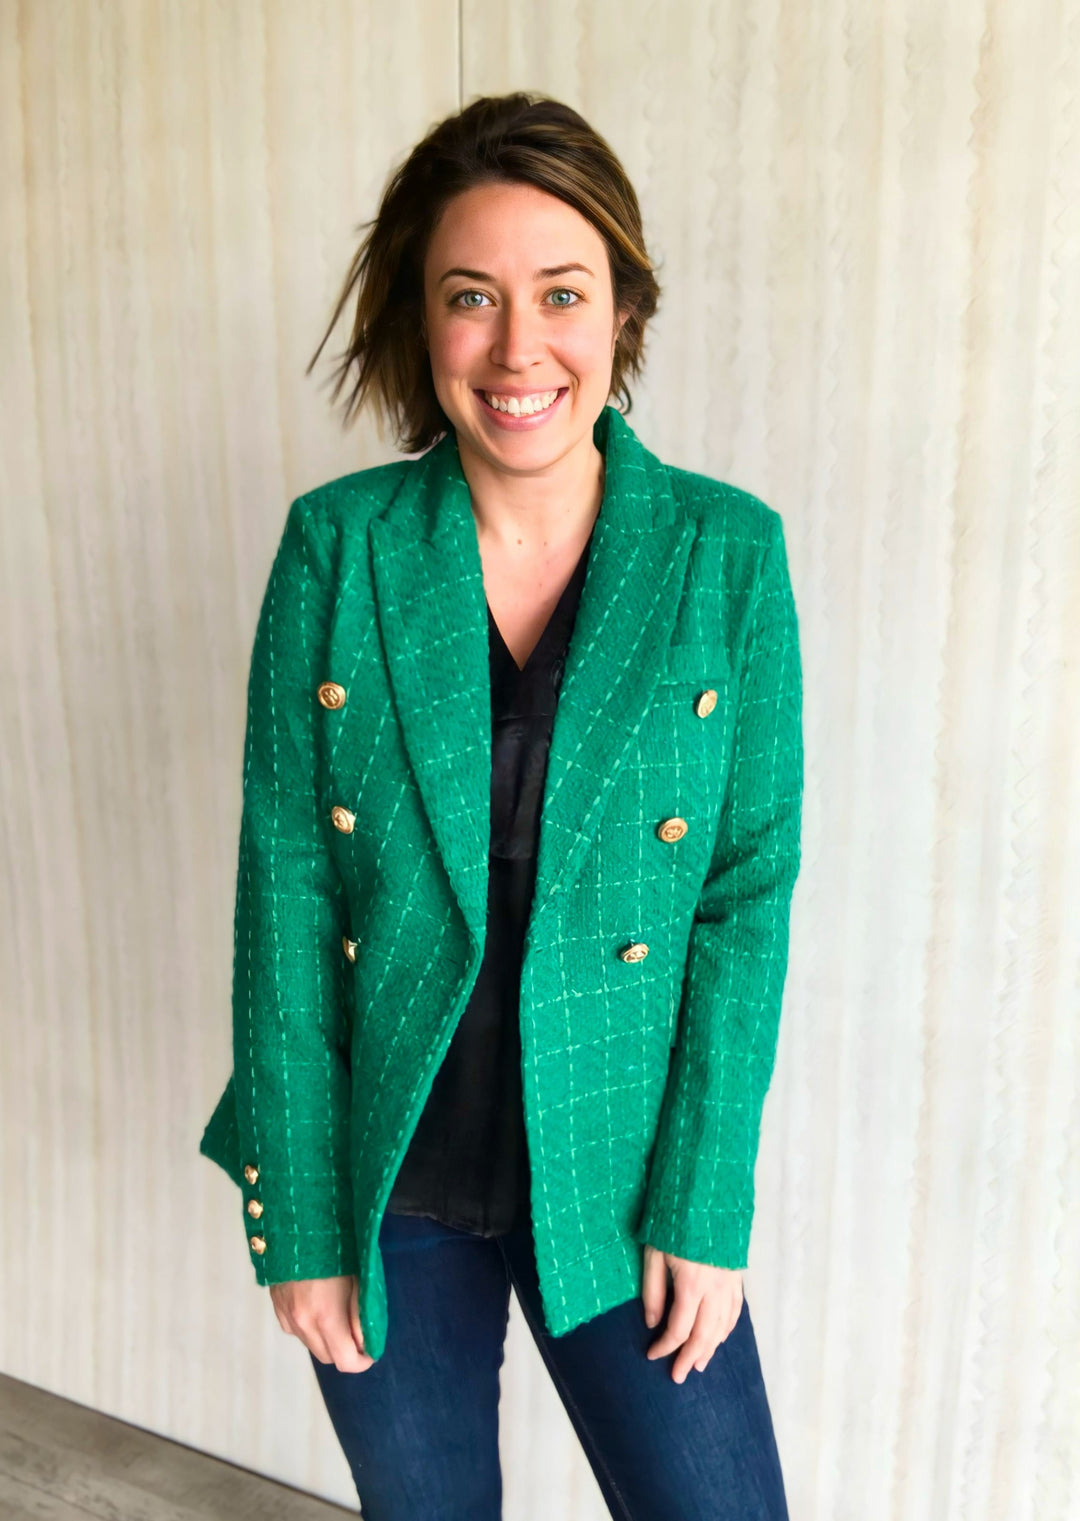 Women's Green Blazer with gold buttons. Perfect Holiday Blazer!